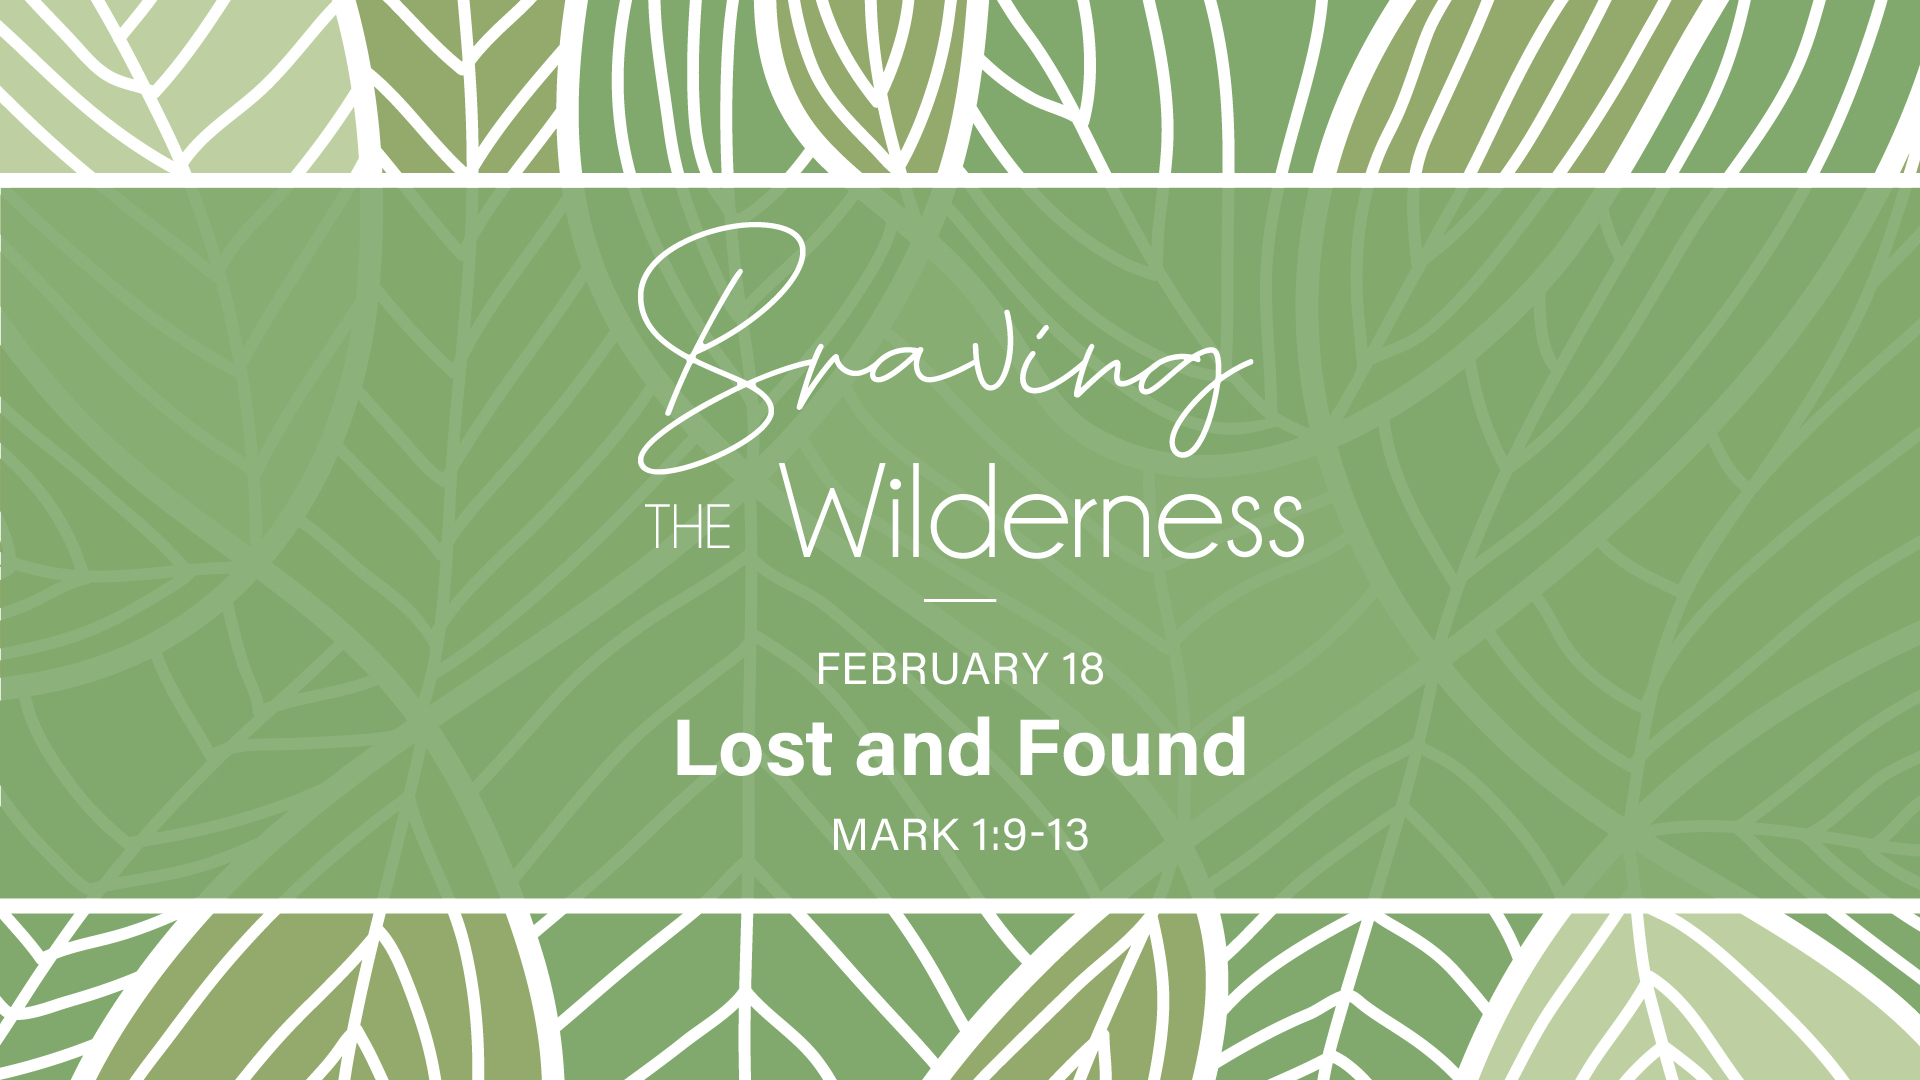 Braving the Wilderness: Lost and Found